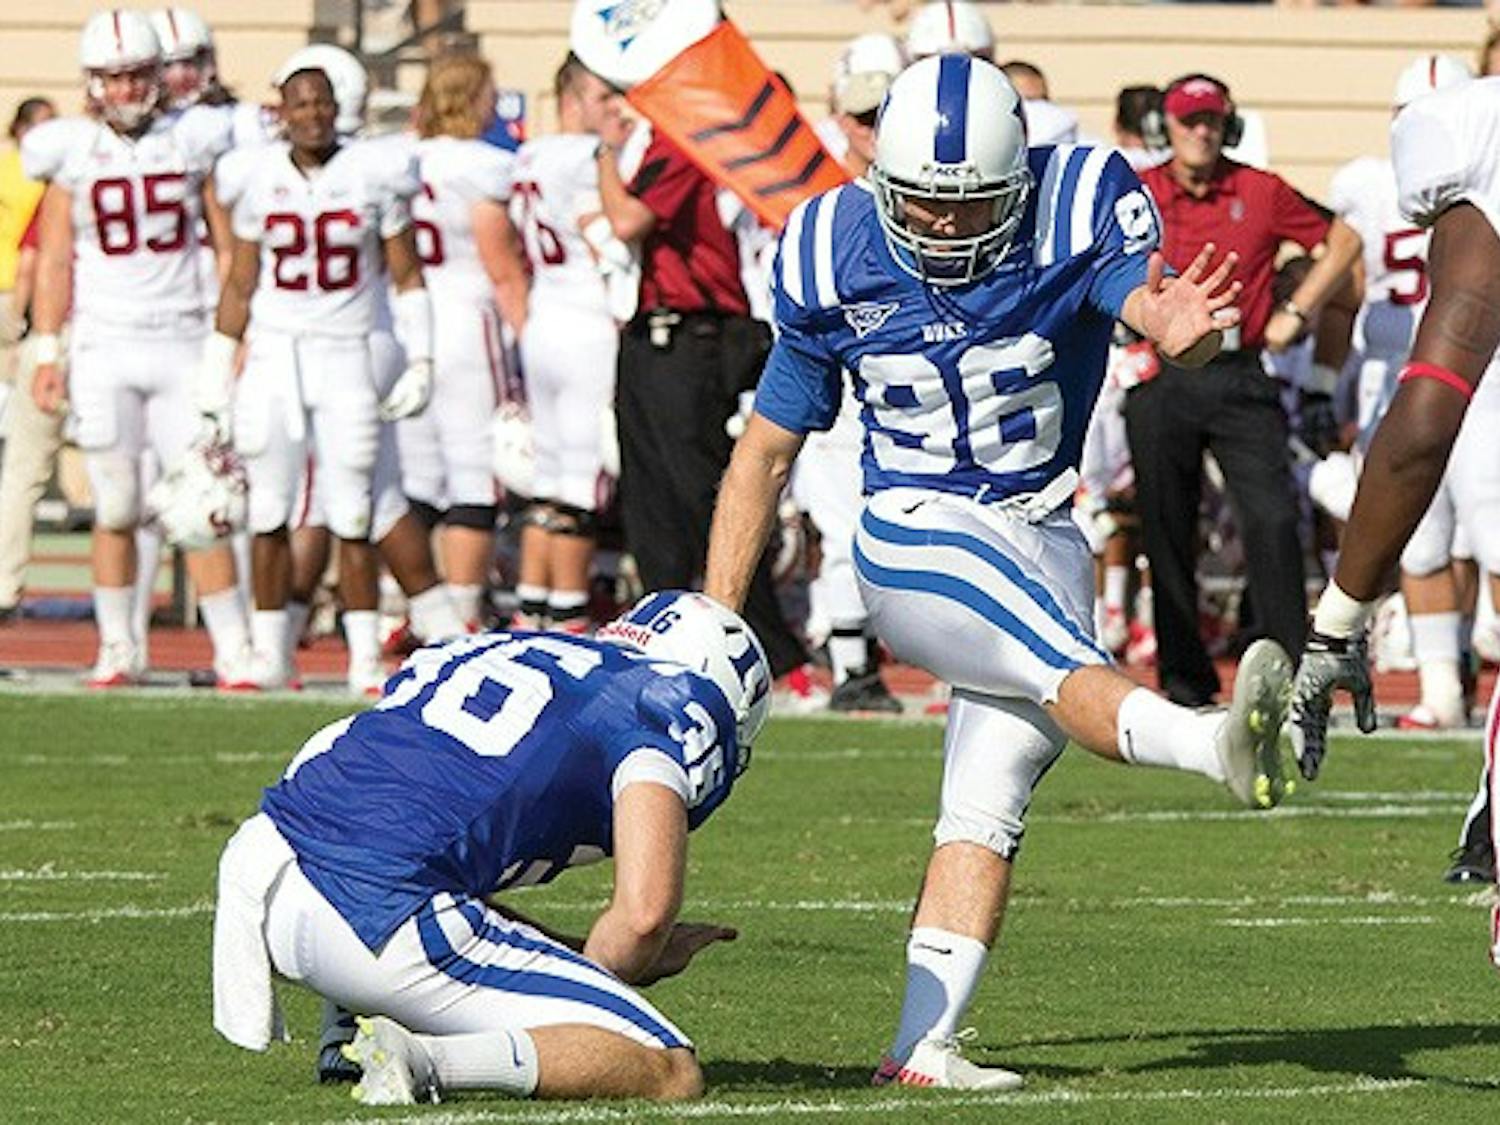 Will Snyderwine missed two field goals against the Cardinal Saturday.